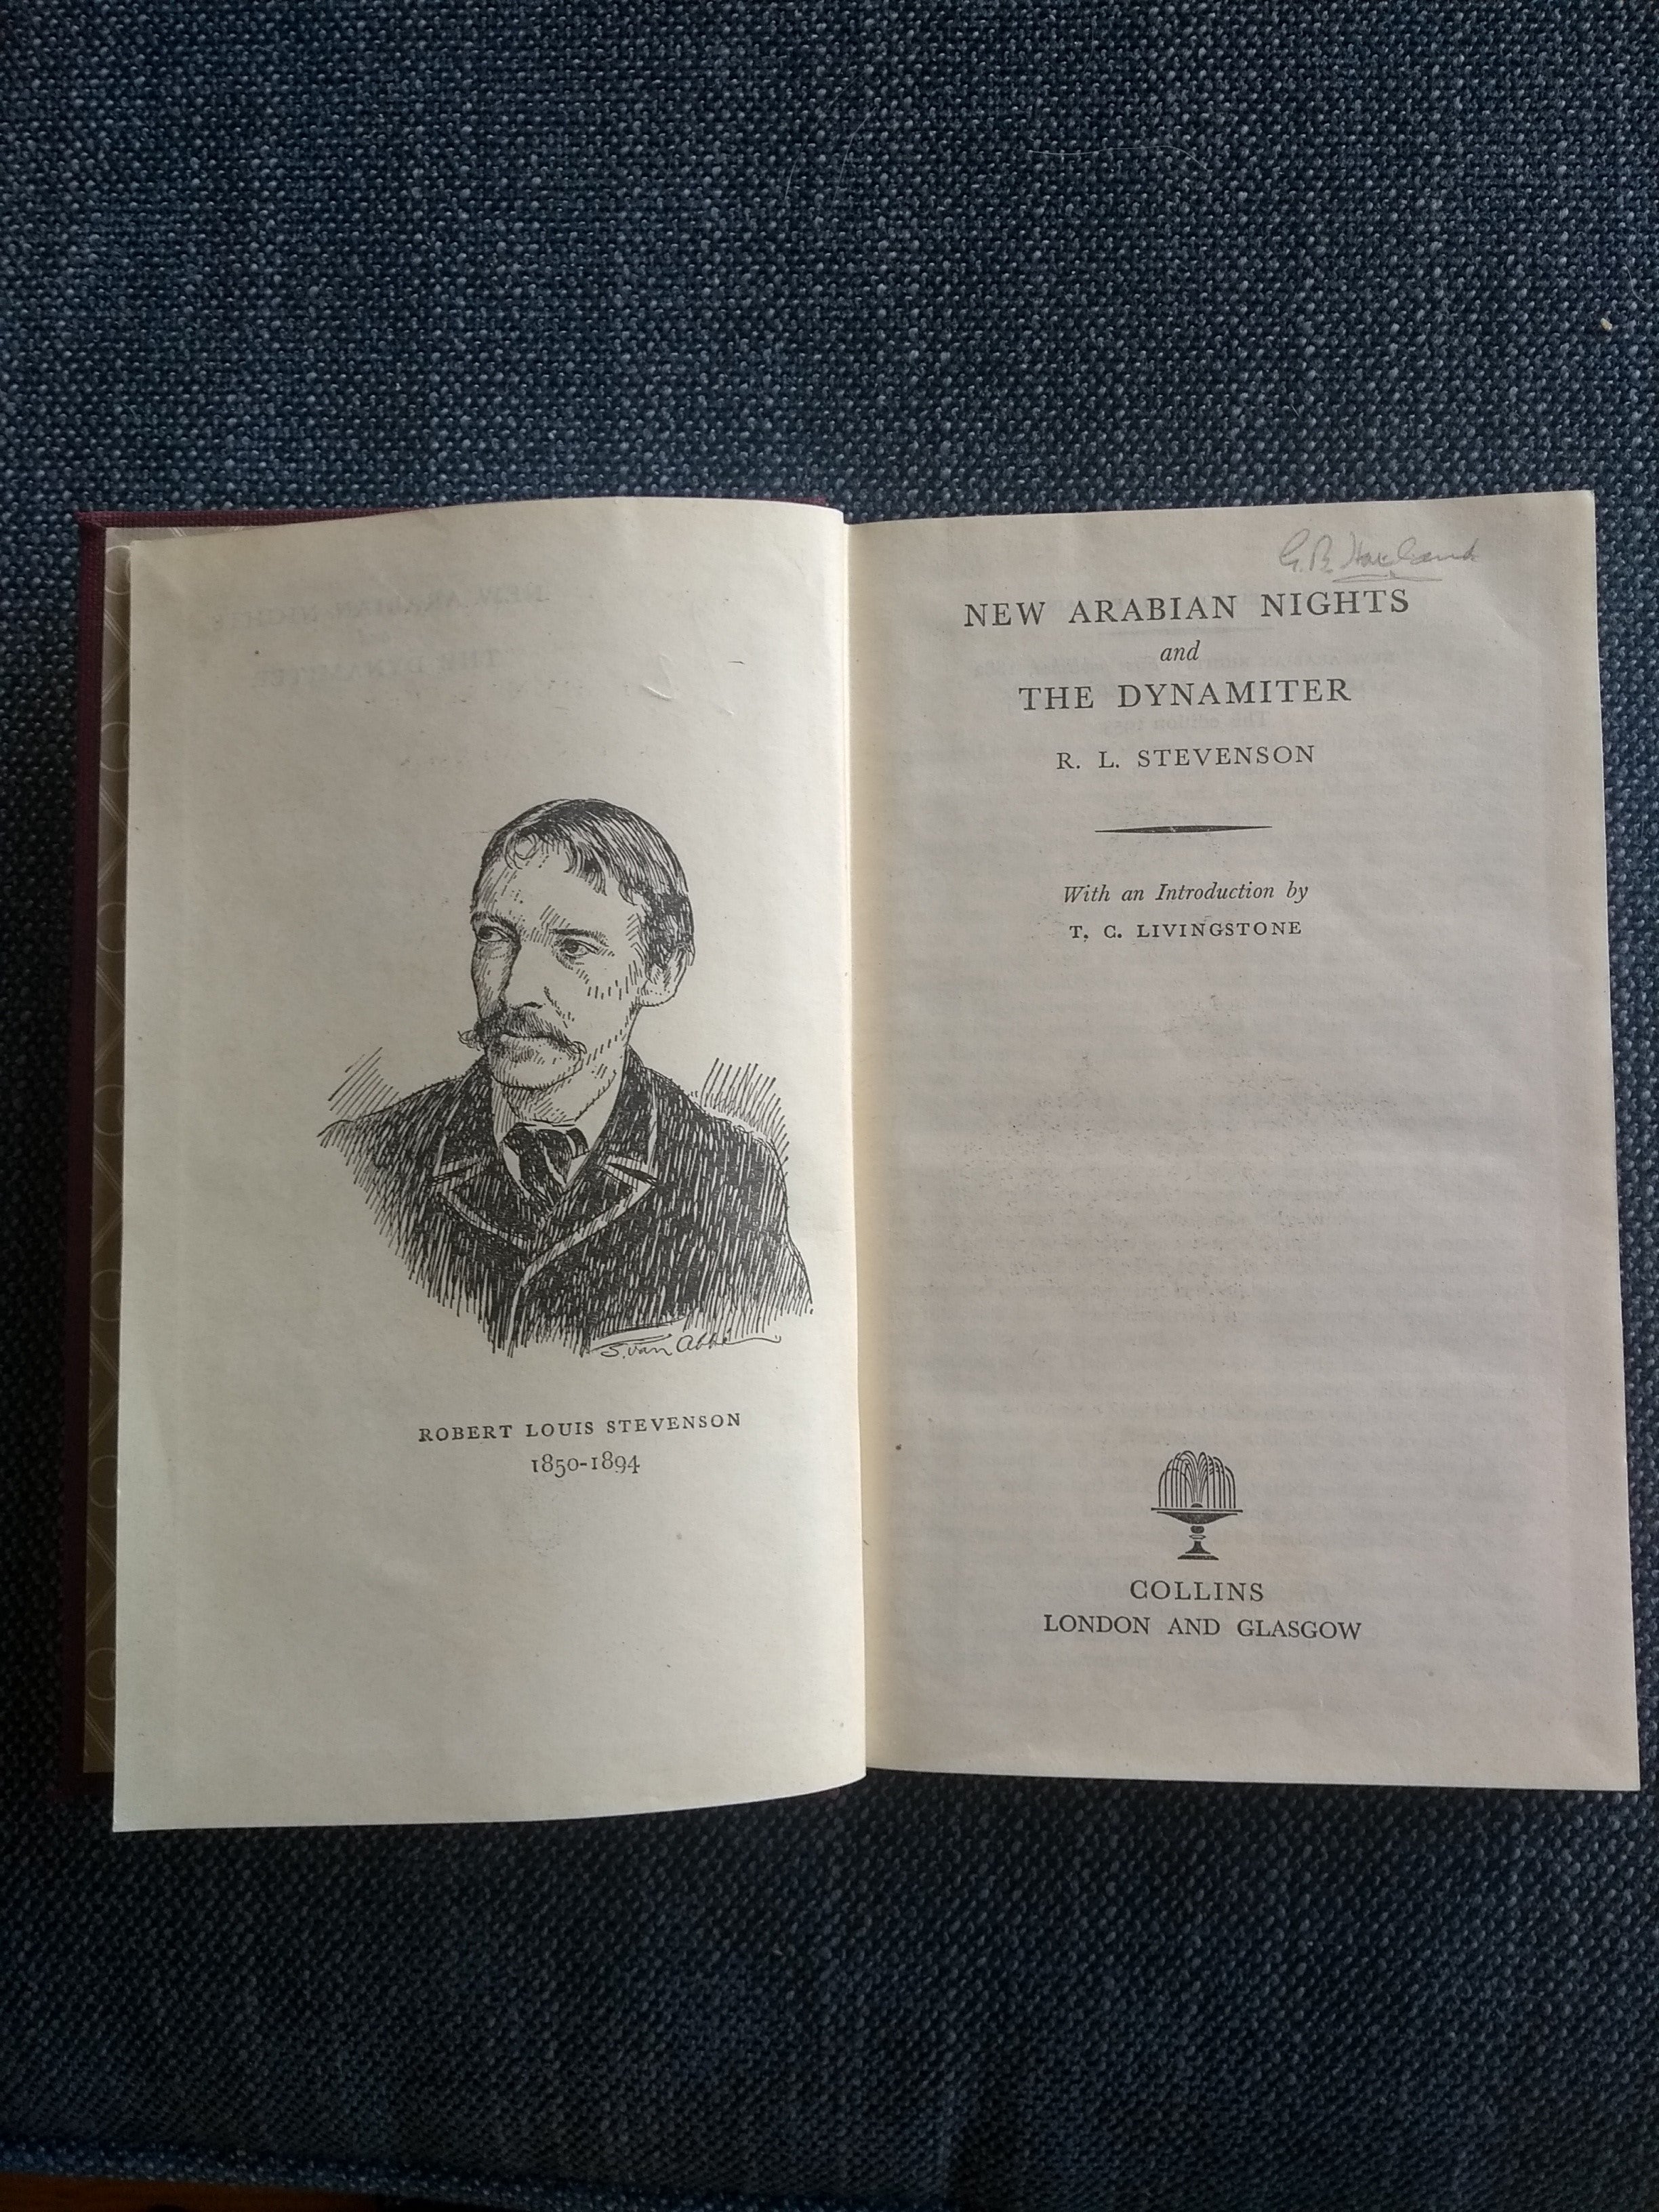 New Arabian Nights and The Dynamiter, by Robert Louis Stevenson, with an Introduction by T. C. Livingstone